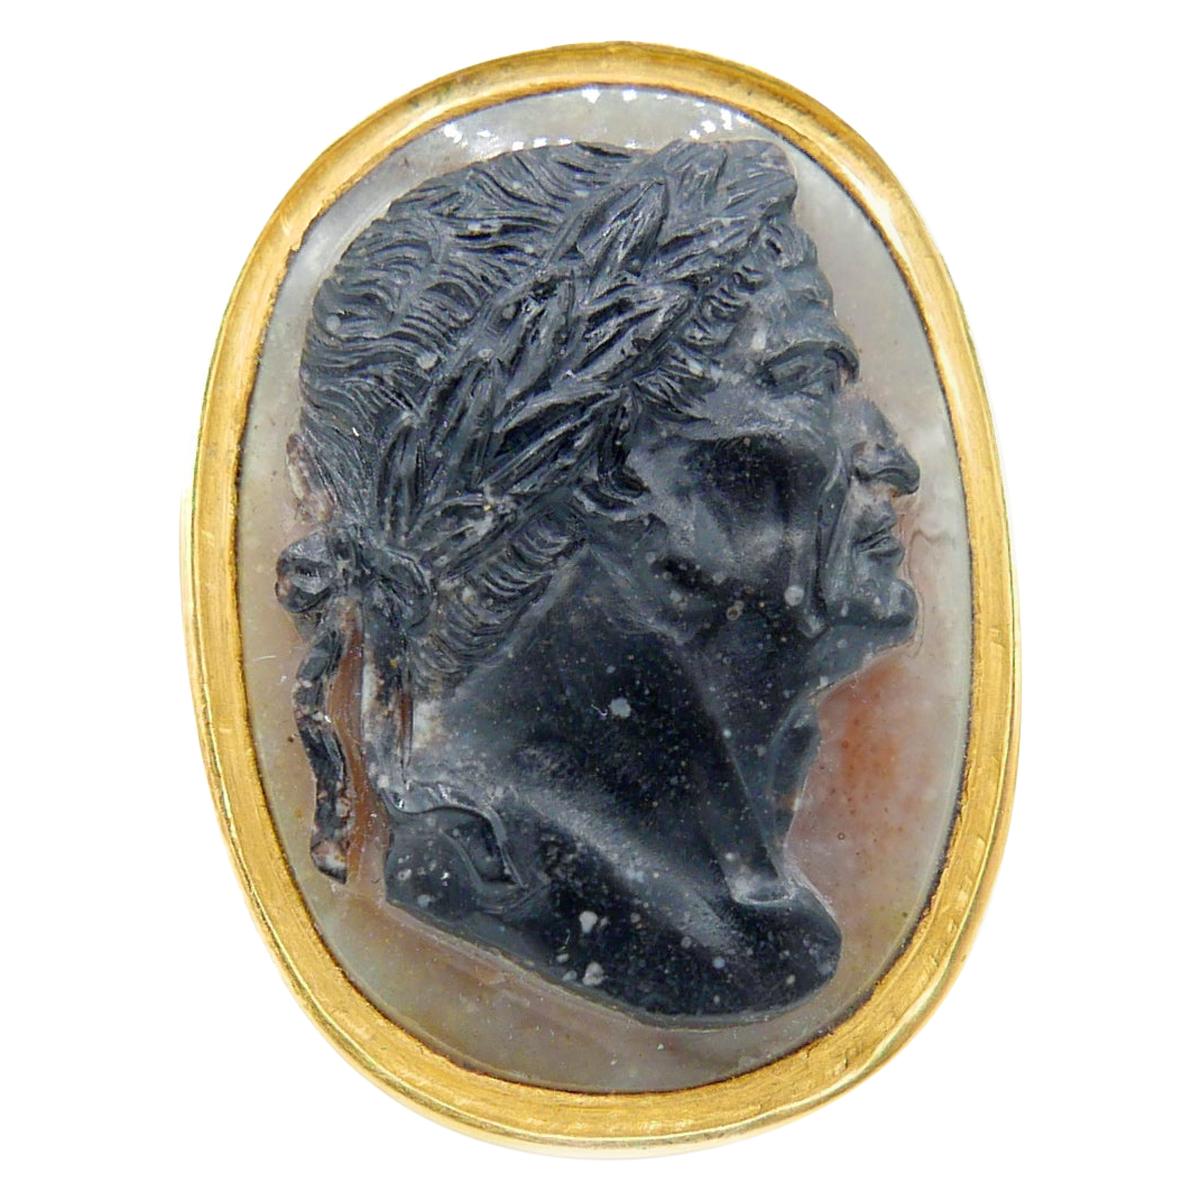 A large carved agate cameo ring depicting the Roman emperor Vespasian (9 - 79 AD). 
The high carat gold mounting is late 19th Century. 
The cameo is Italian, early 18th century. 
The cameo measures 2.5 x 1.8cm
Ring size 9 US - sizable.
Weighs 15